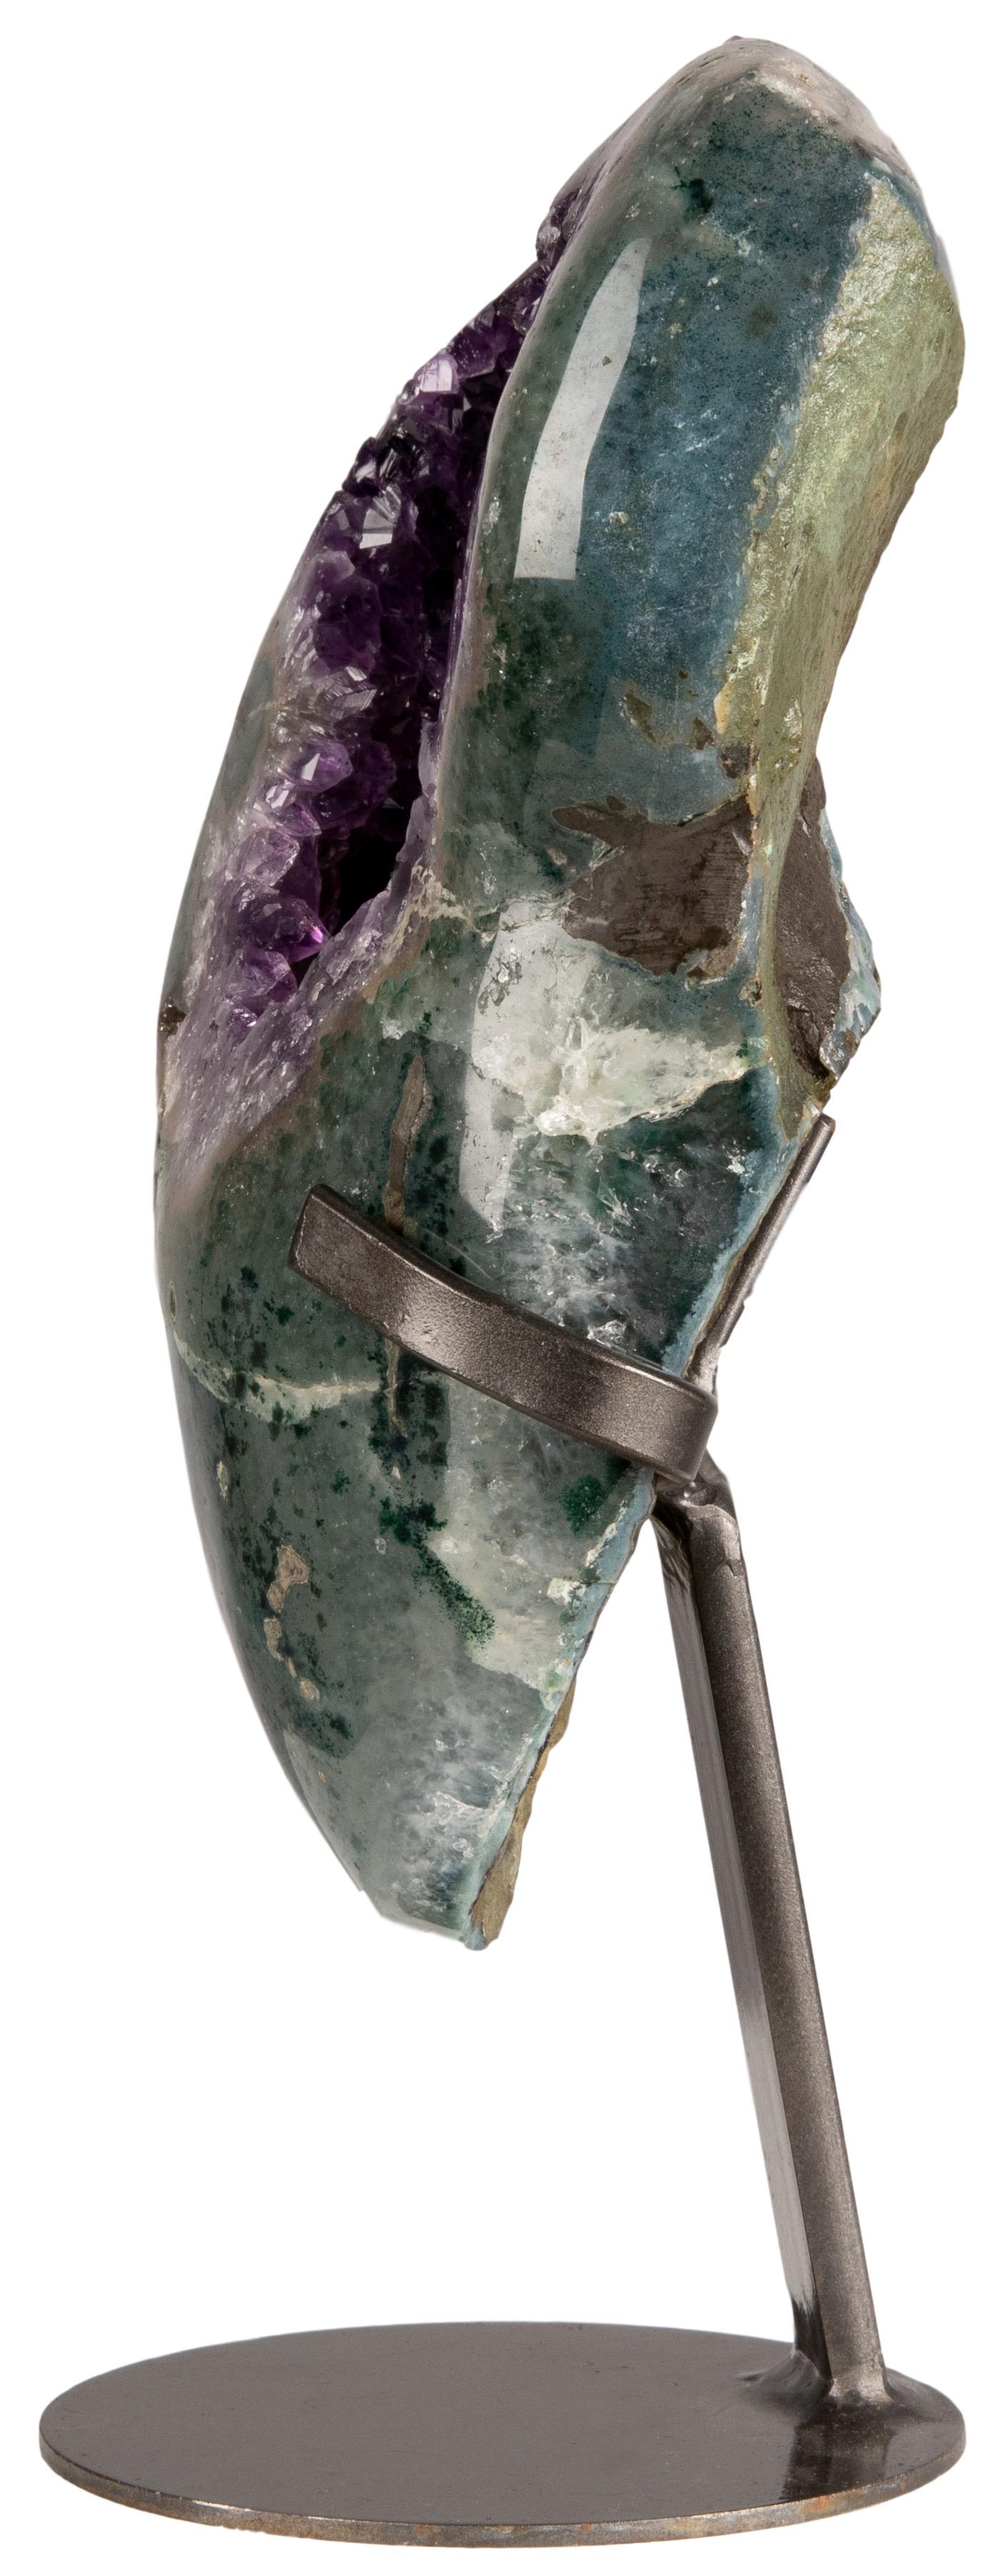 An interesting and stunning geode section with a striking colour mix. 

In this aesthetic piece the original basalt has been polished to reveal the exquisite green celadonite hidden within on the front, whilst maintaining its rough condition at